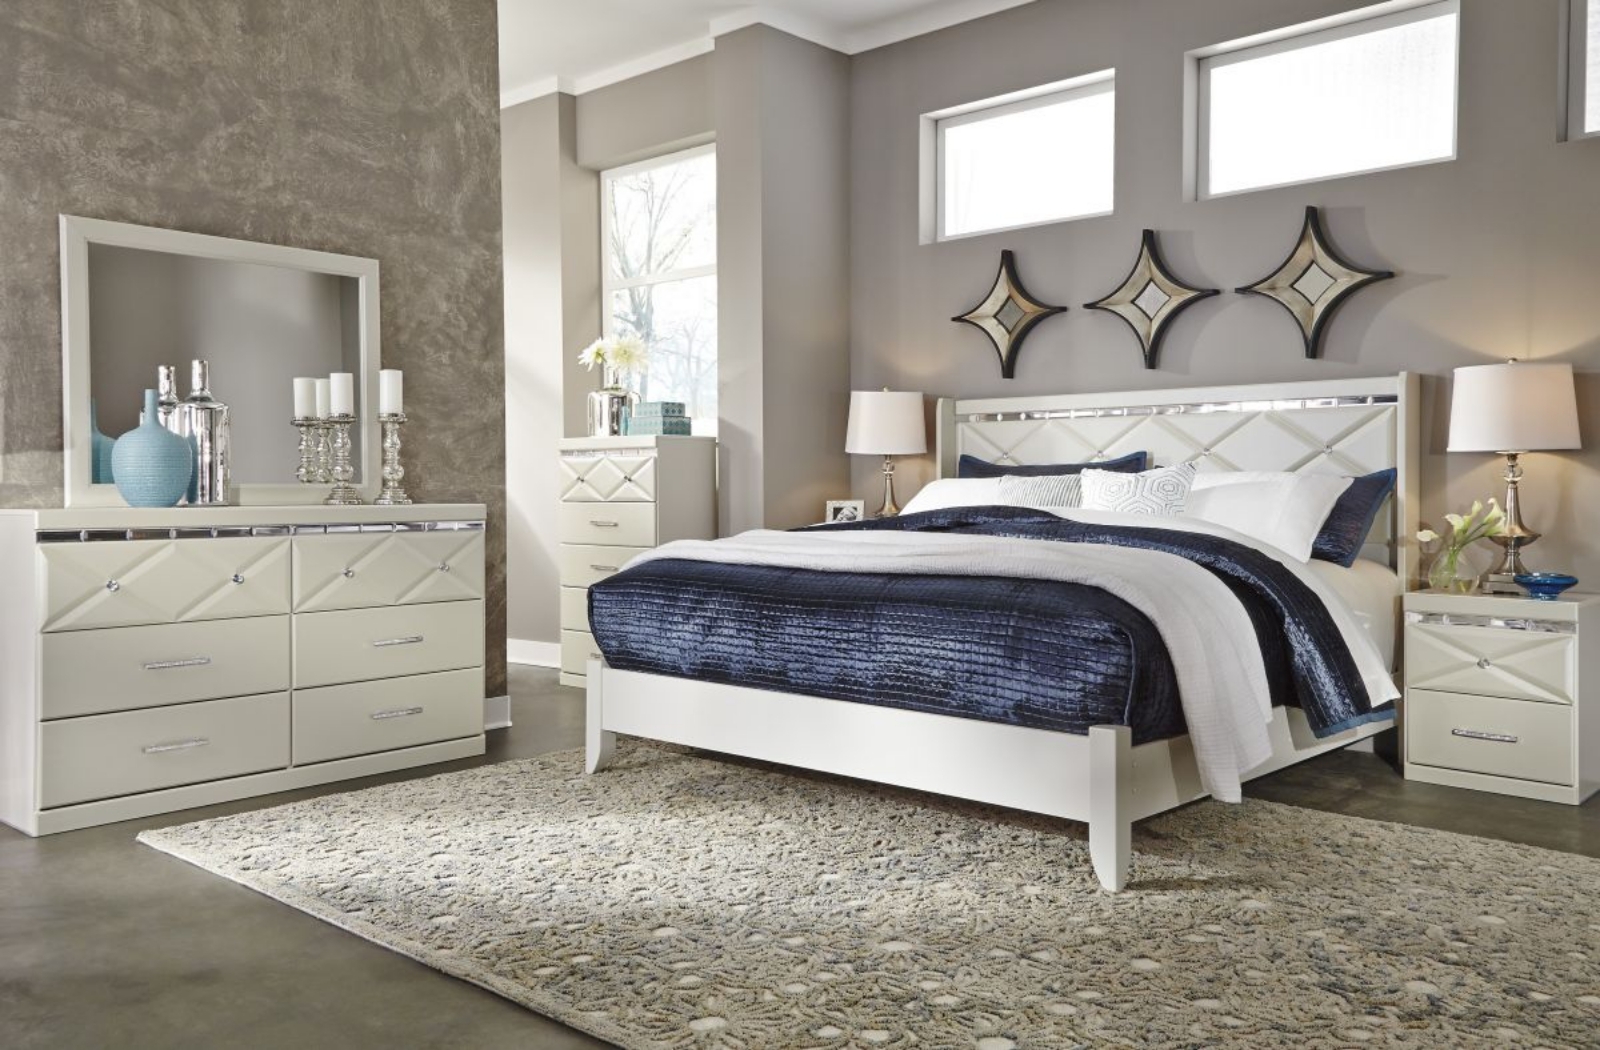 Picture of Dreamur 5 Piece King Bedroom Group